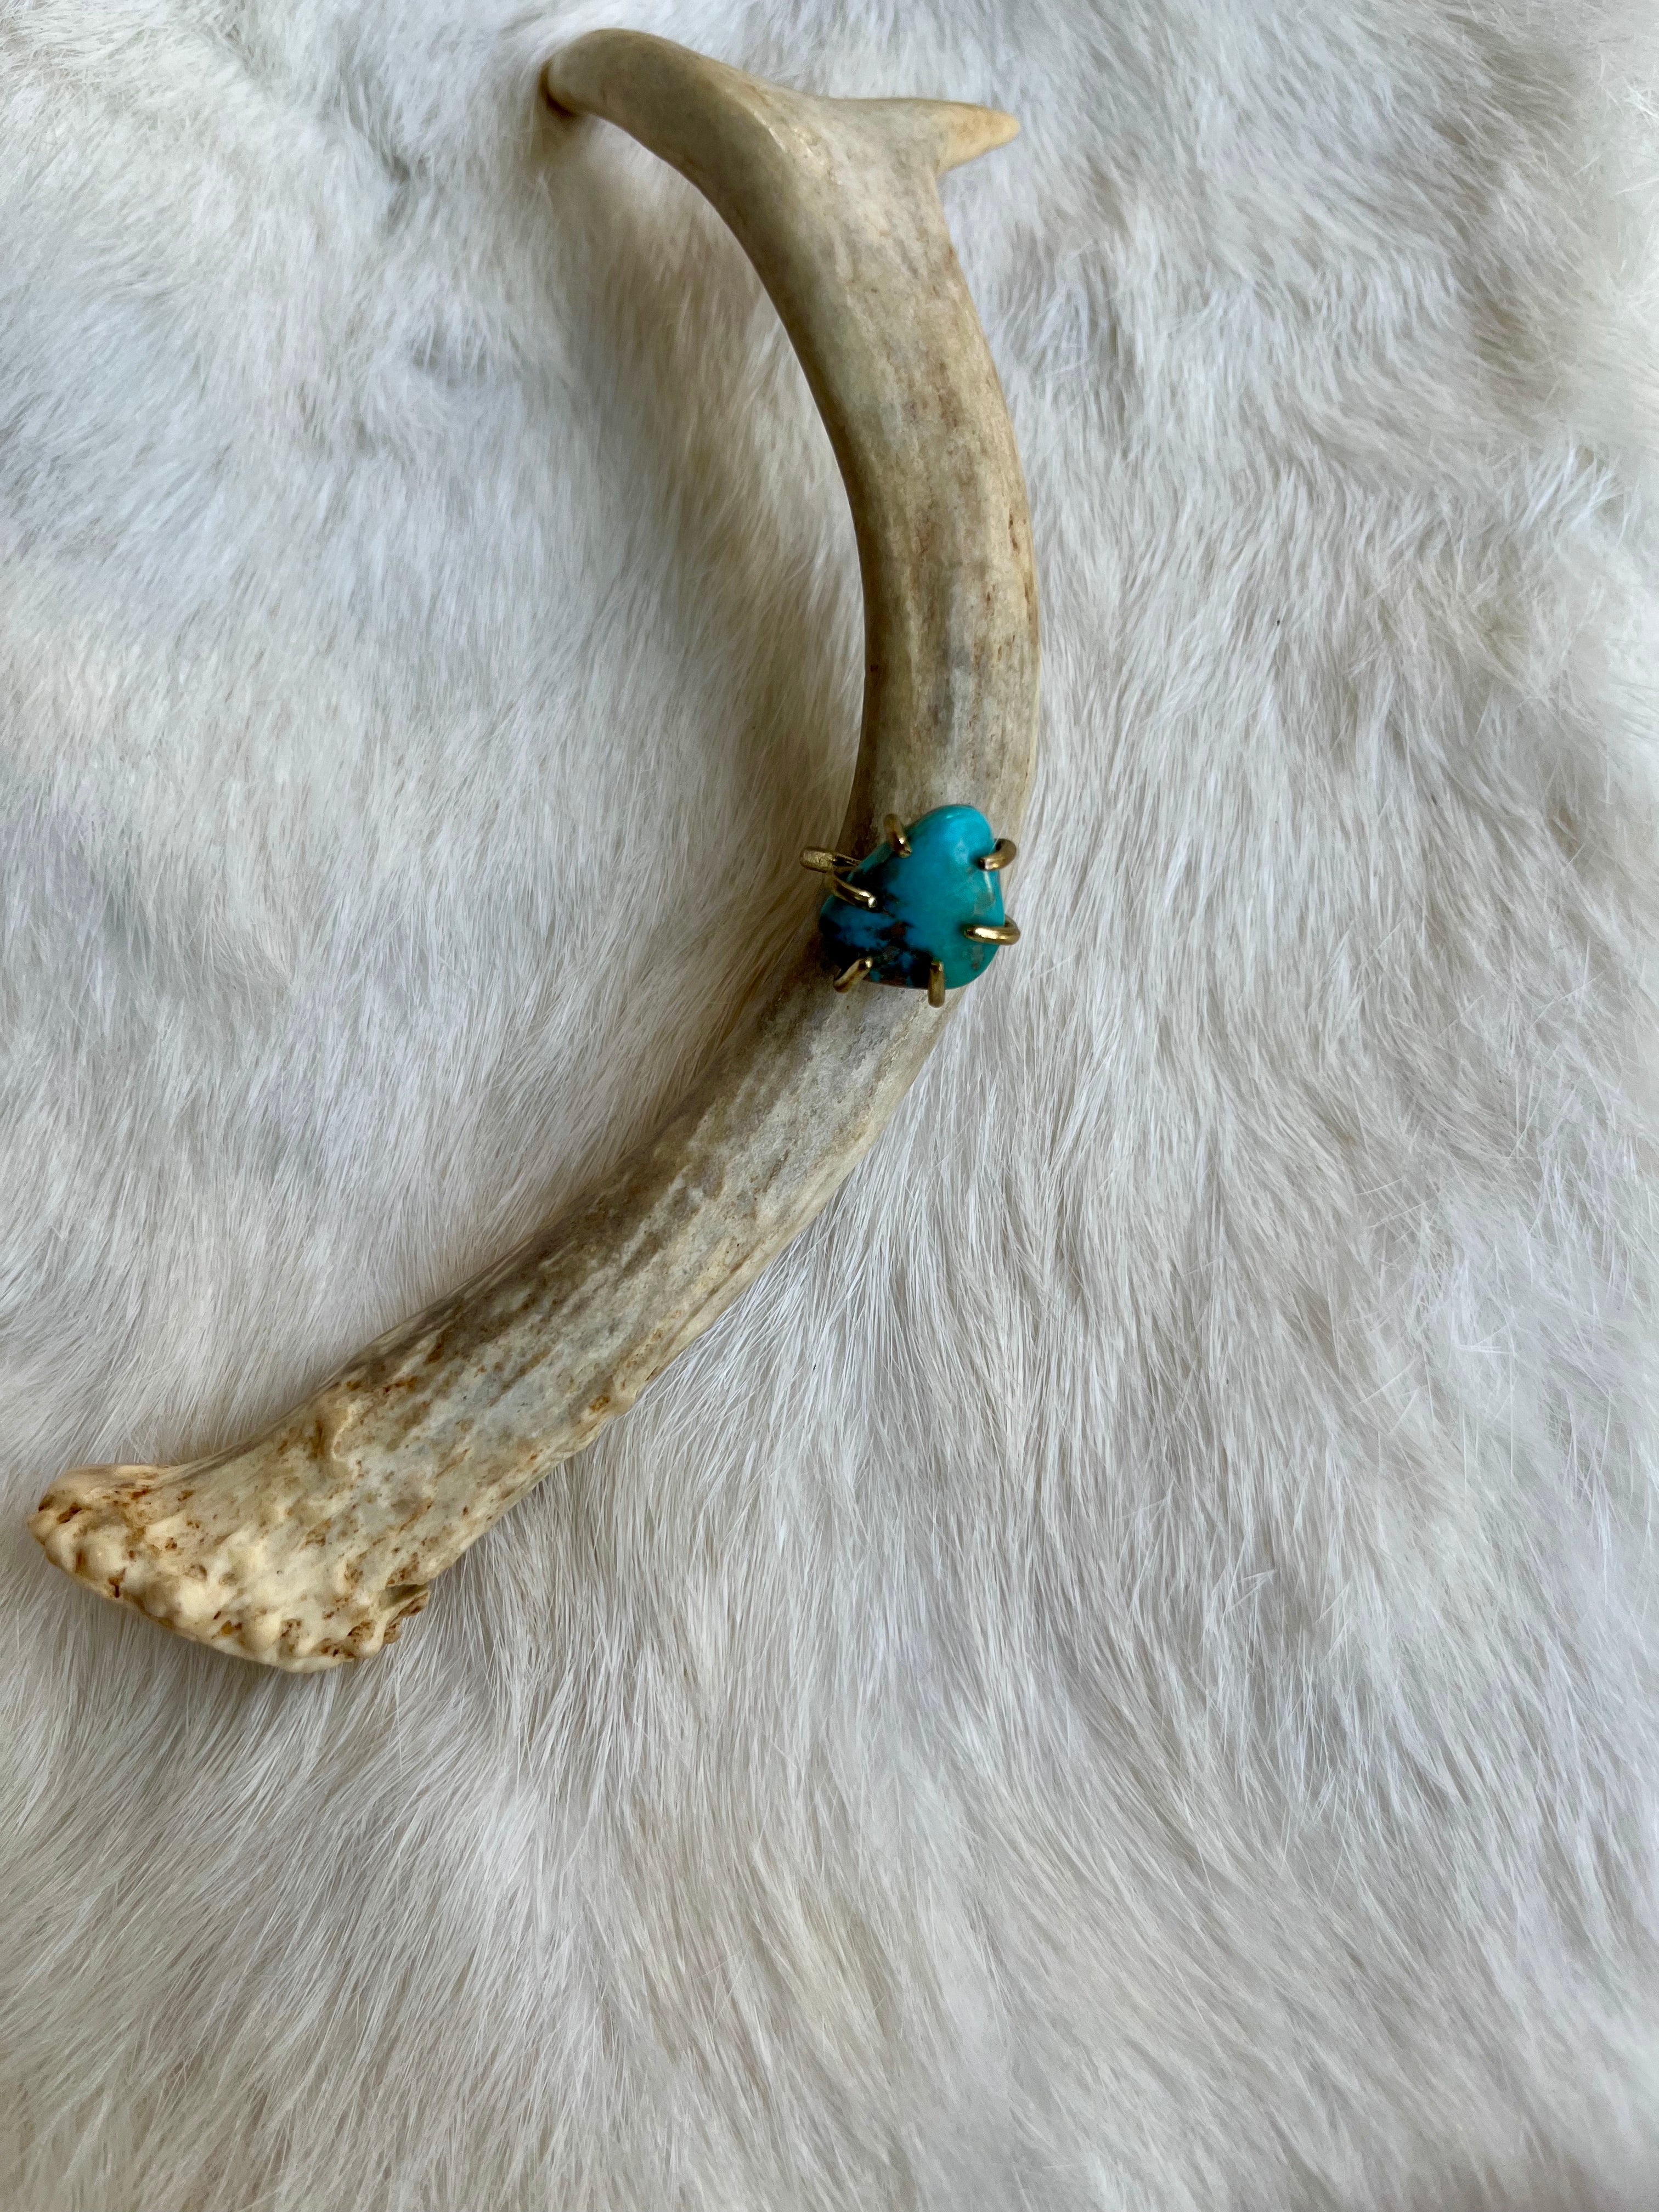 Turquoise 6 Prong Ring 2